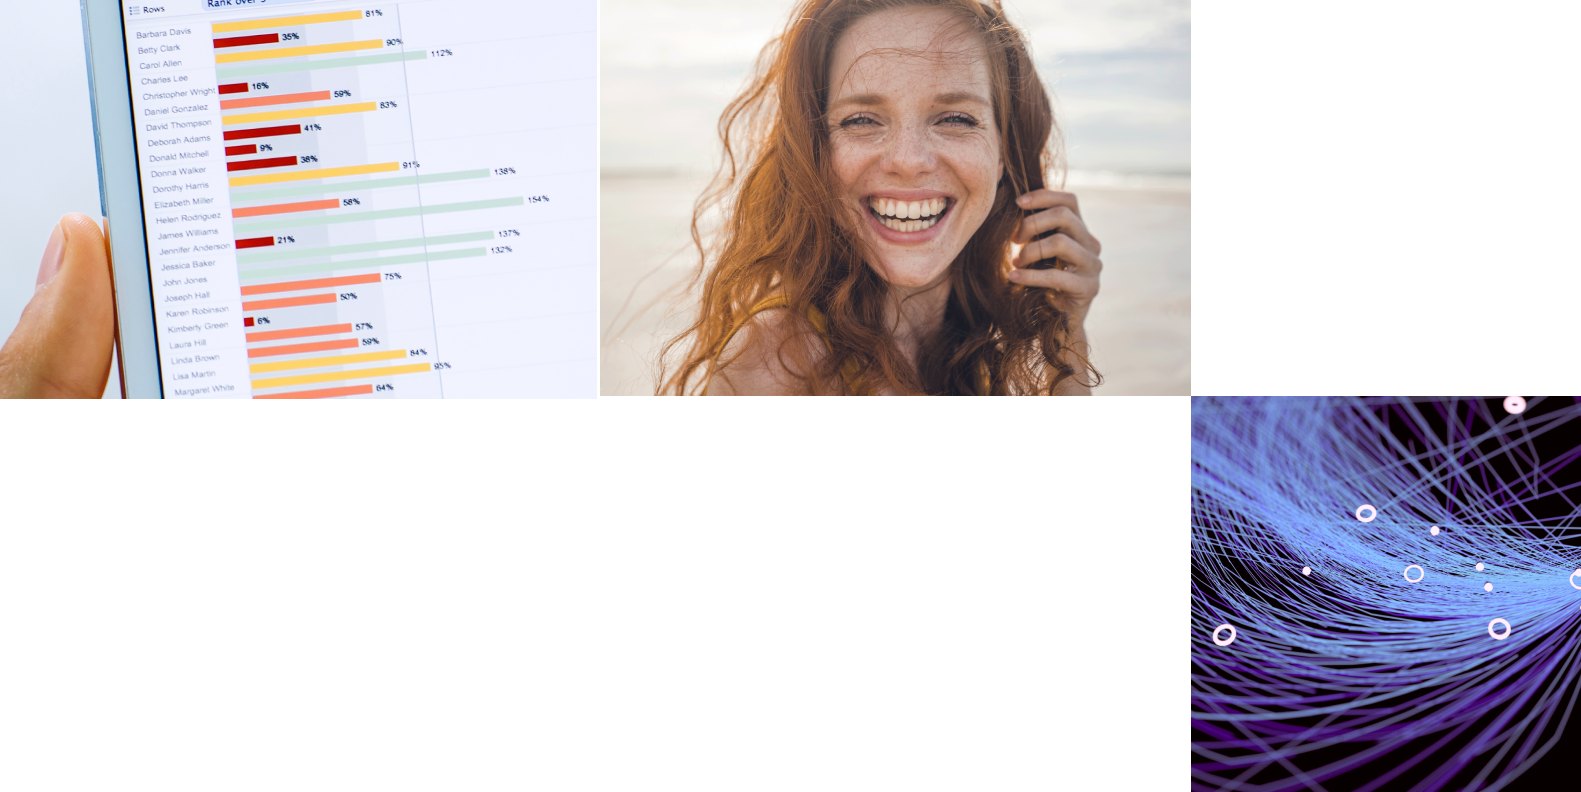 Top left: tablet with a list of patient metrics; top right: Smiling white redhead woman on the beach